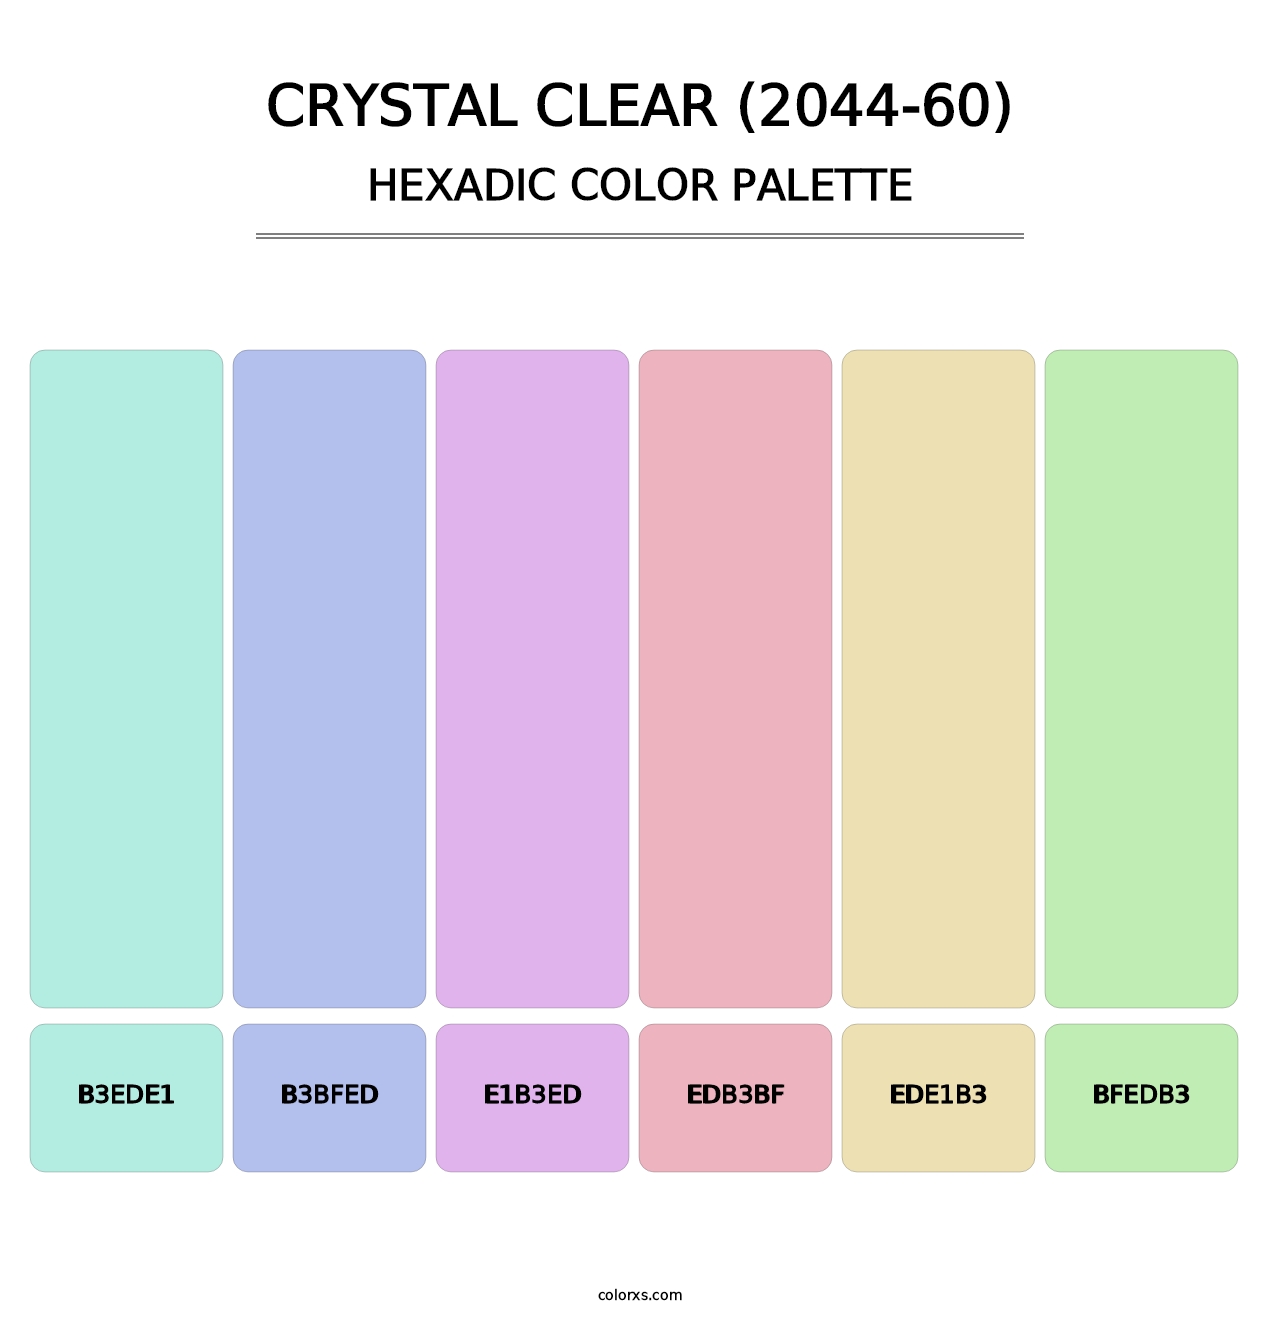 Crystal Clear (2044-60) - Hexadic Color Palette